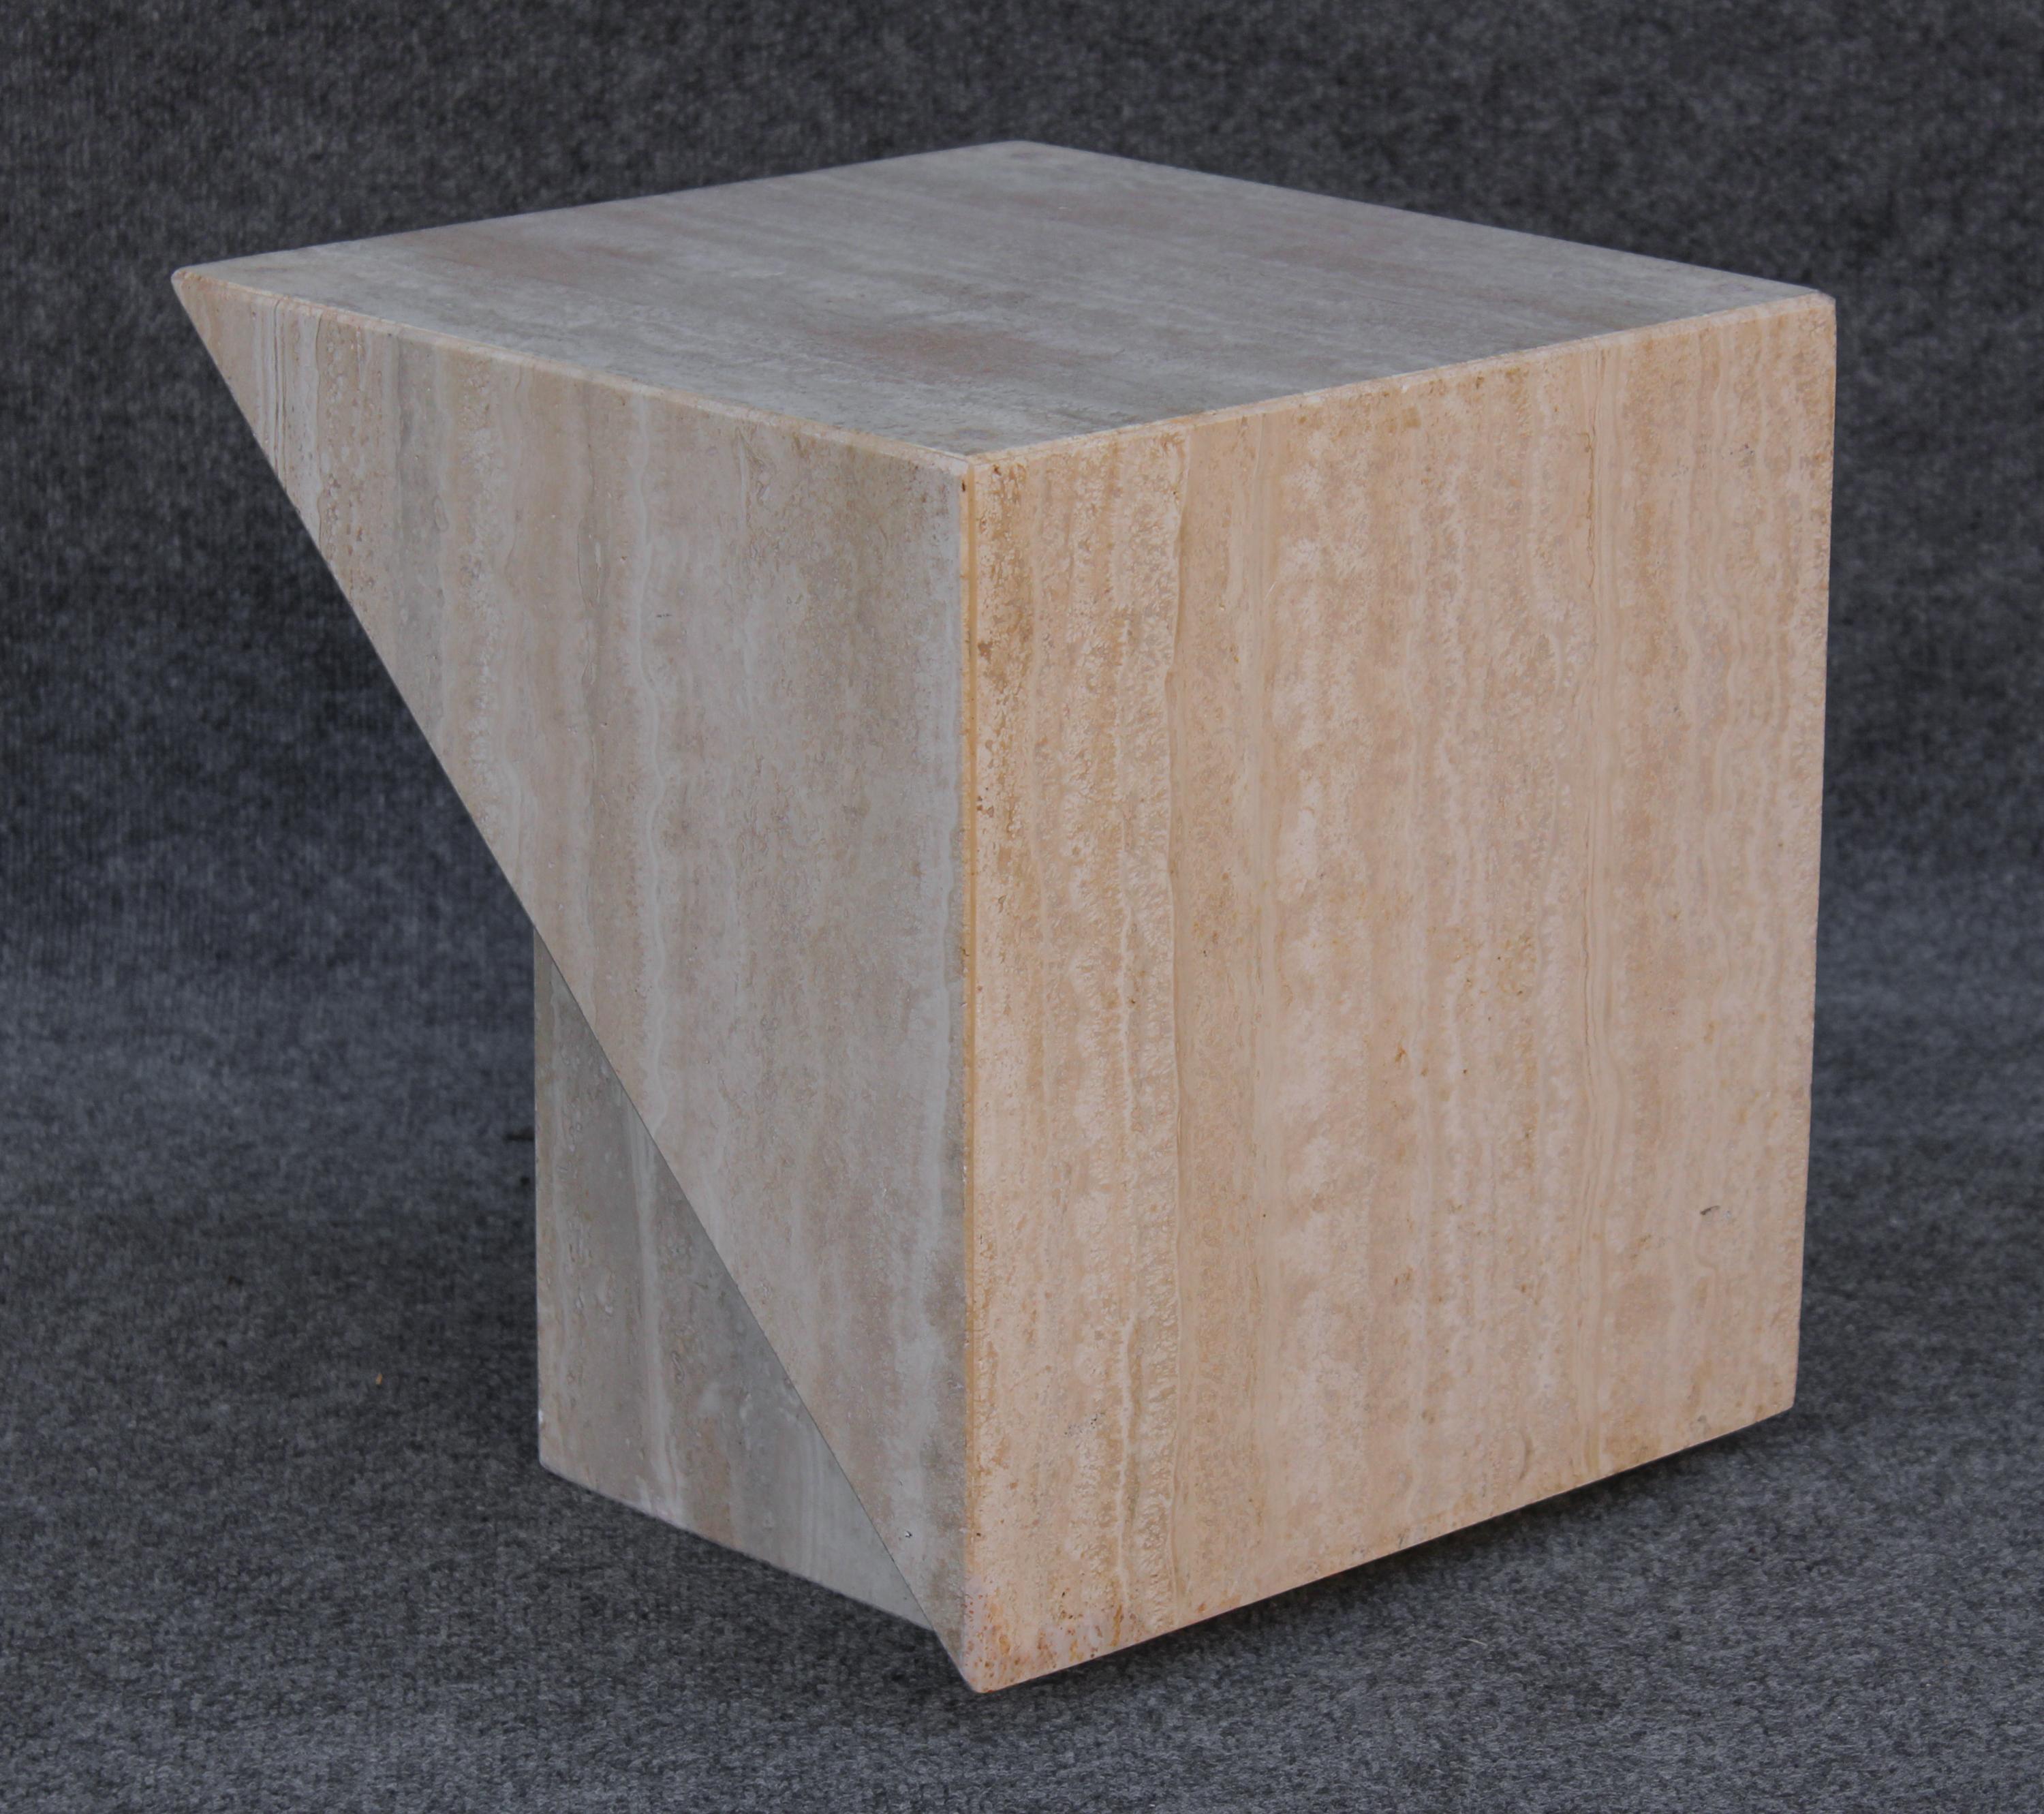 Midcentury Italian Post Modern Travertine Marble Cube Side Table or End Table For Sale 4